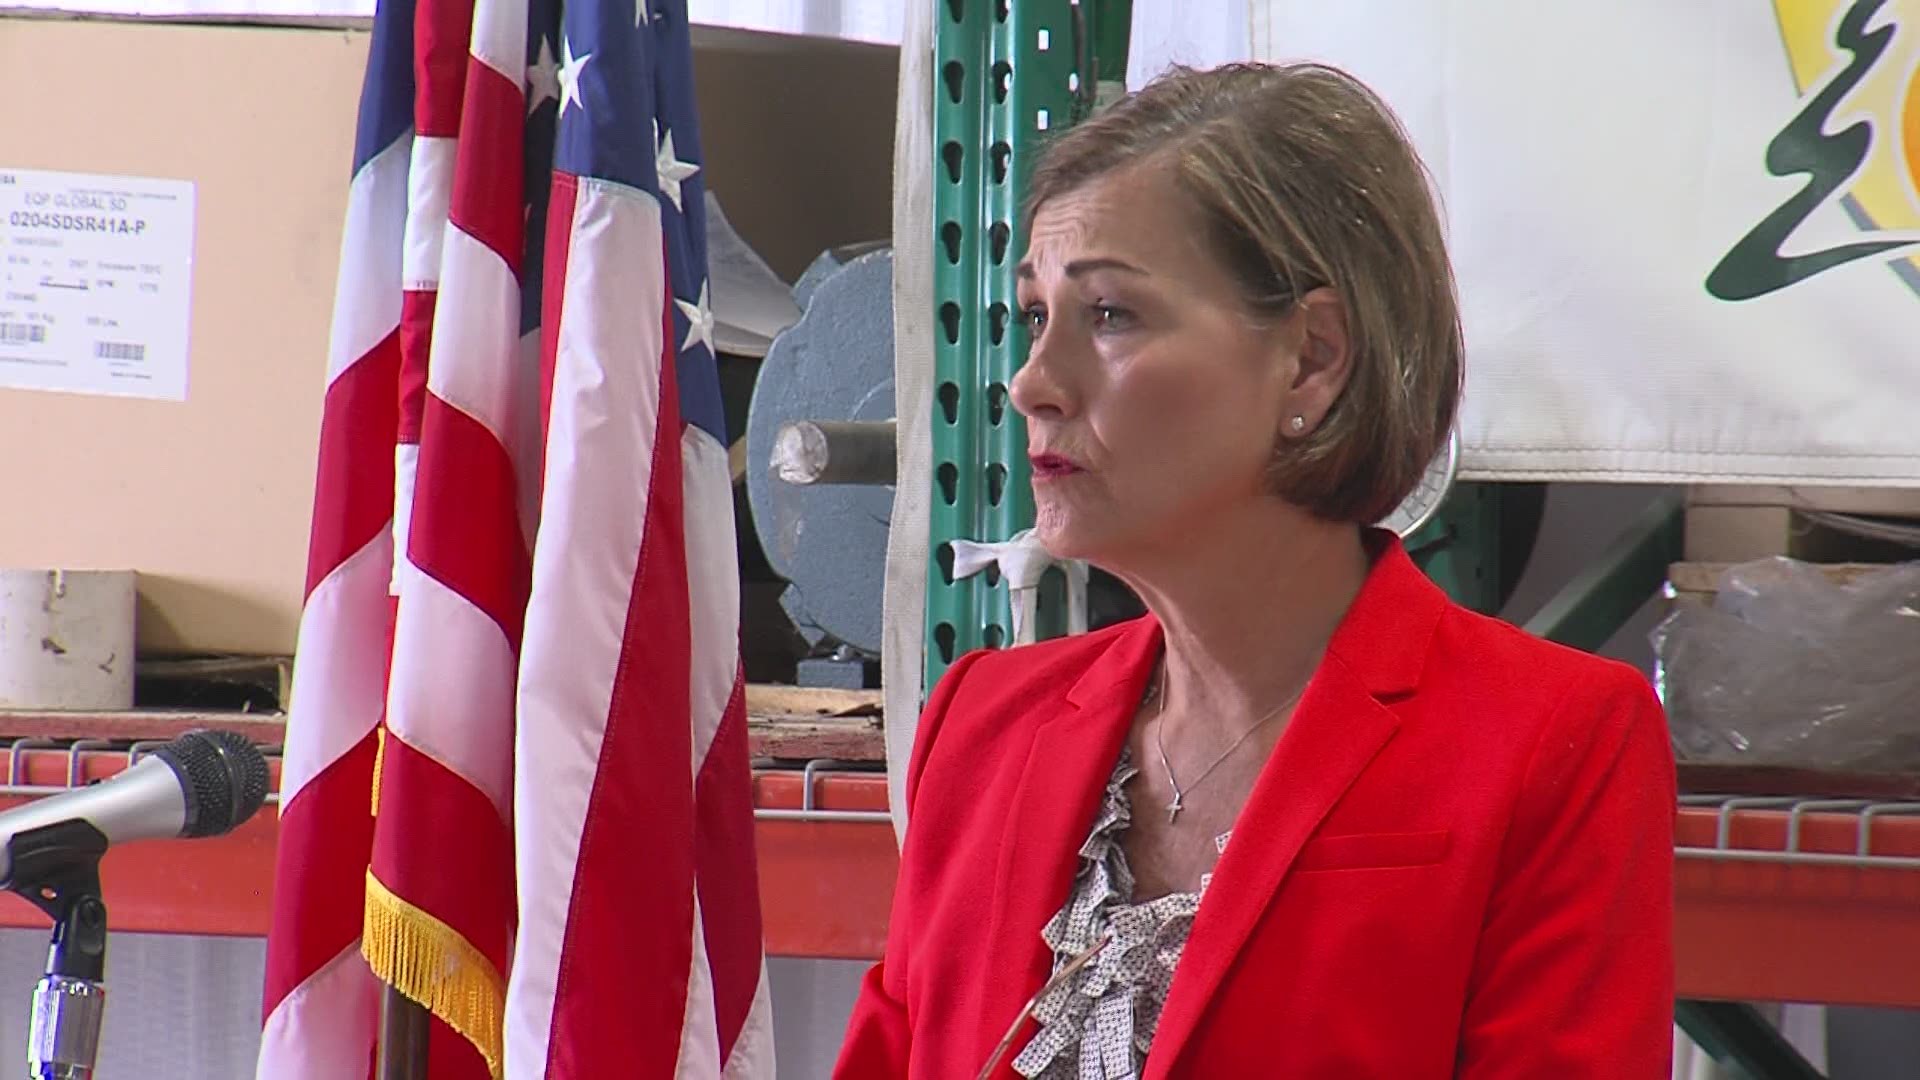 Gov. Reynolds on continued pandemic: 'There really are no days off for COVID-19'